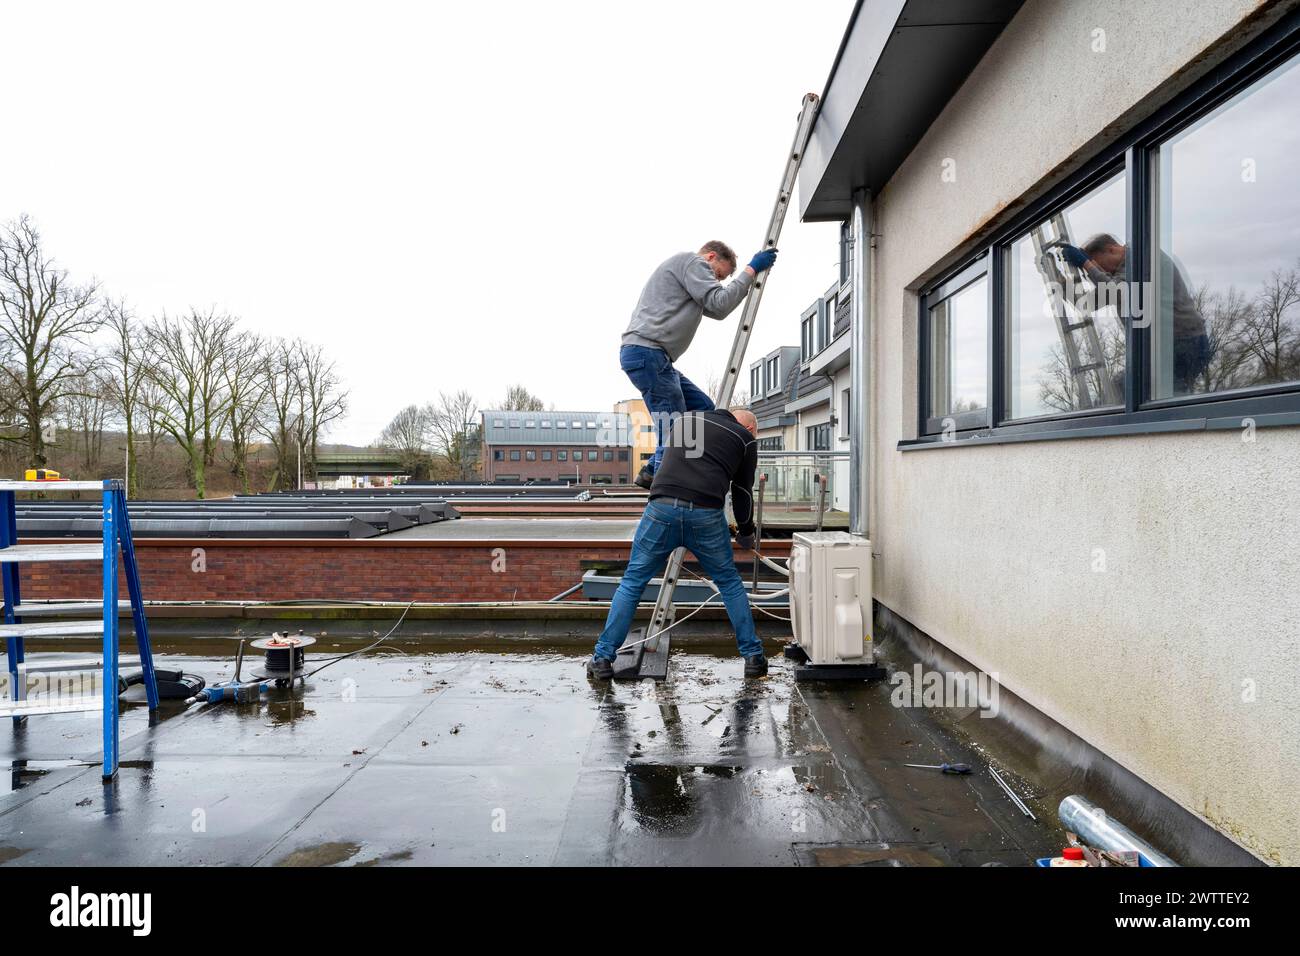 Two workers installing a window on an overcast day. Stock Photo